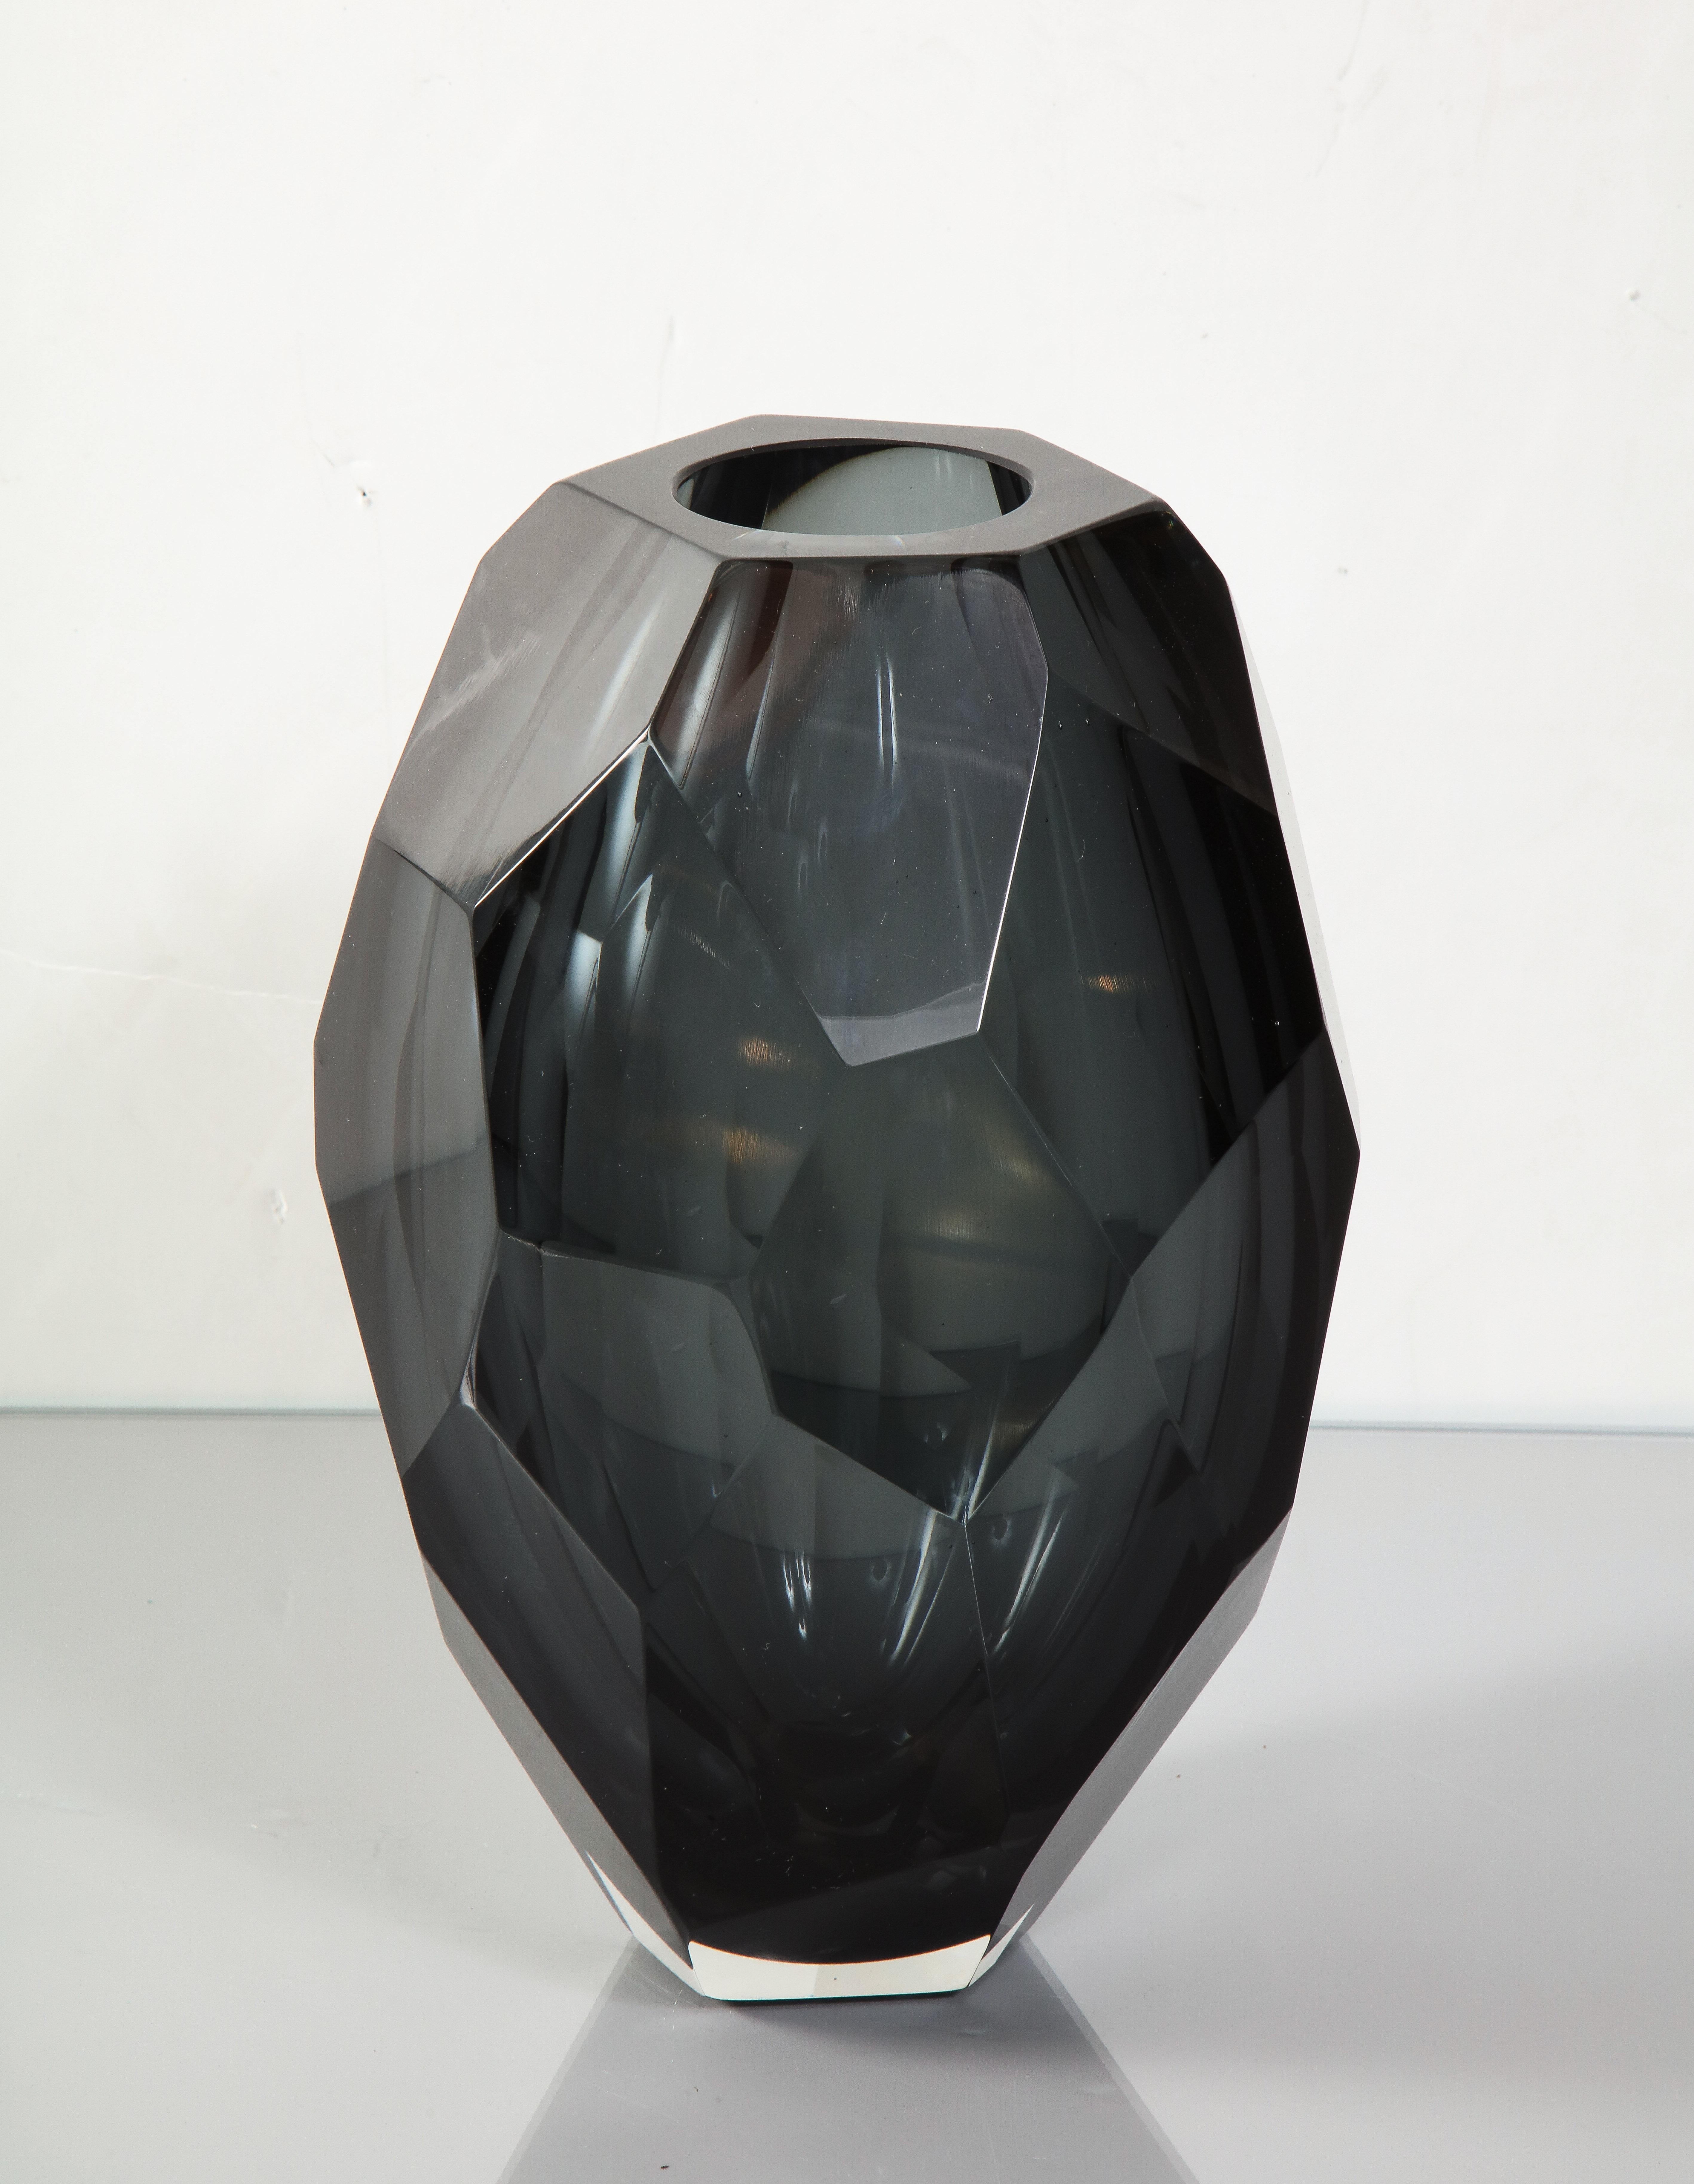 Murano dark gray glass gem cut vase. It is made-to-order and available in different colors.